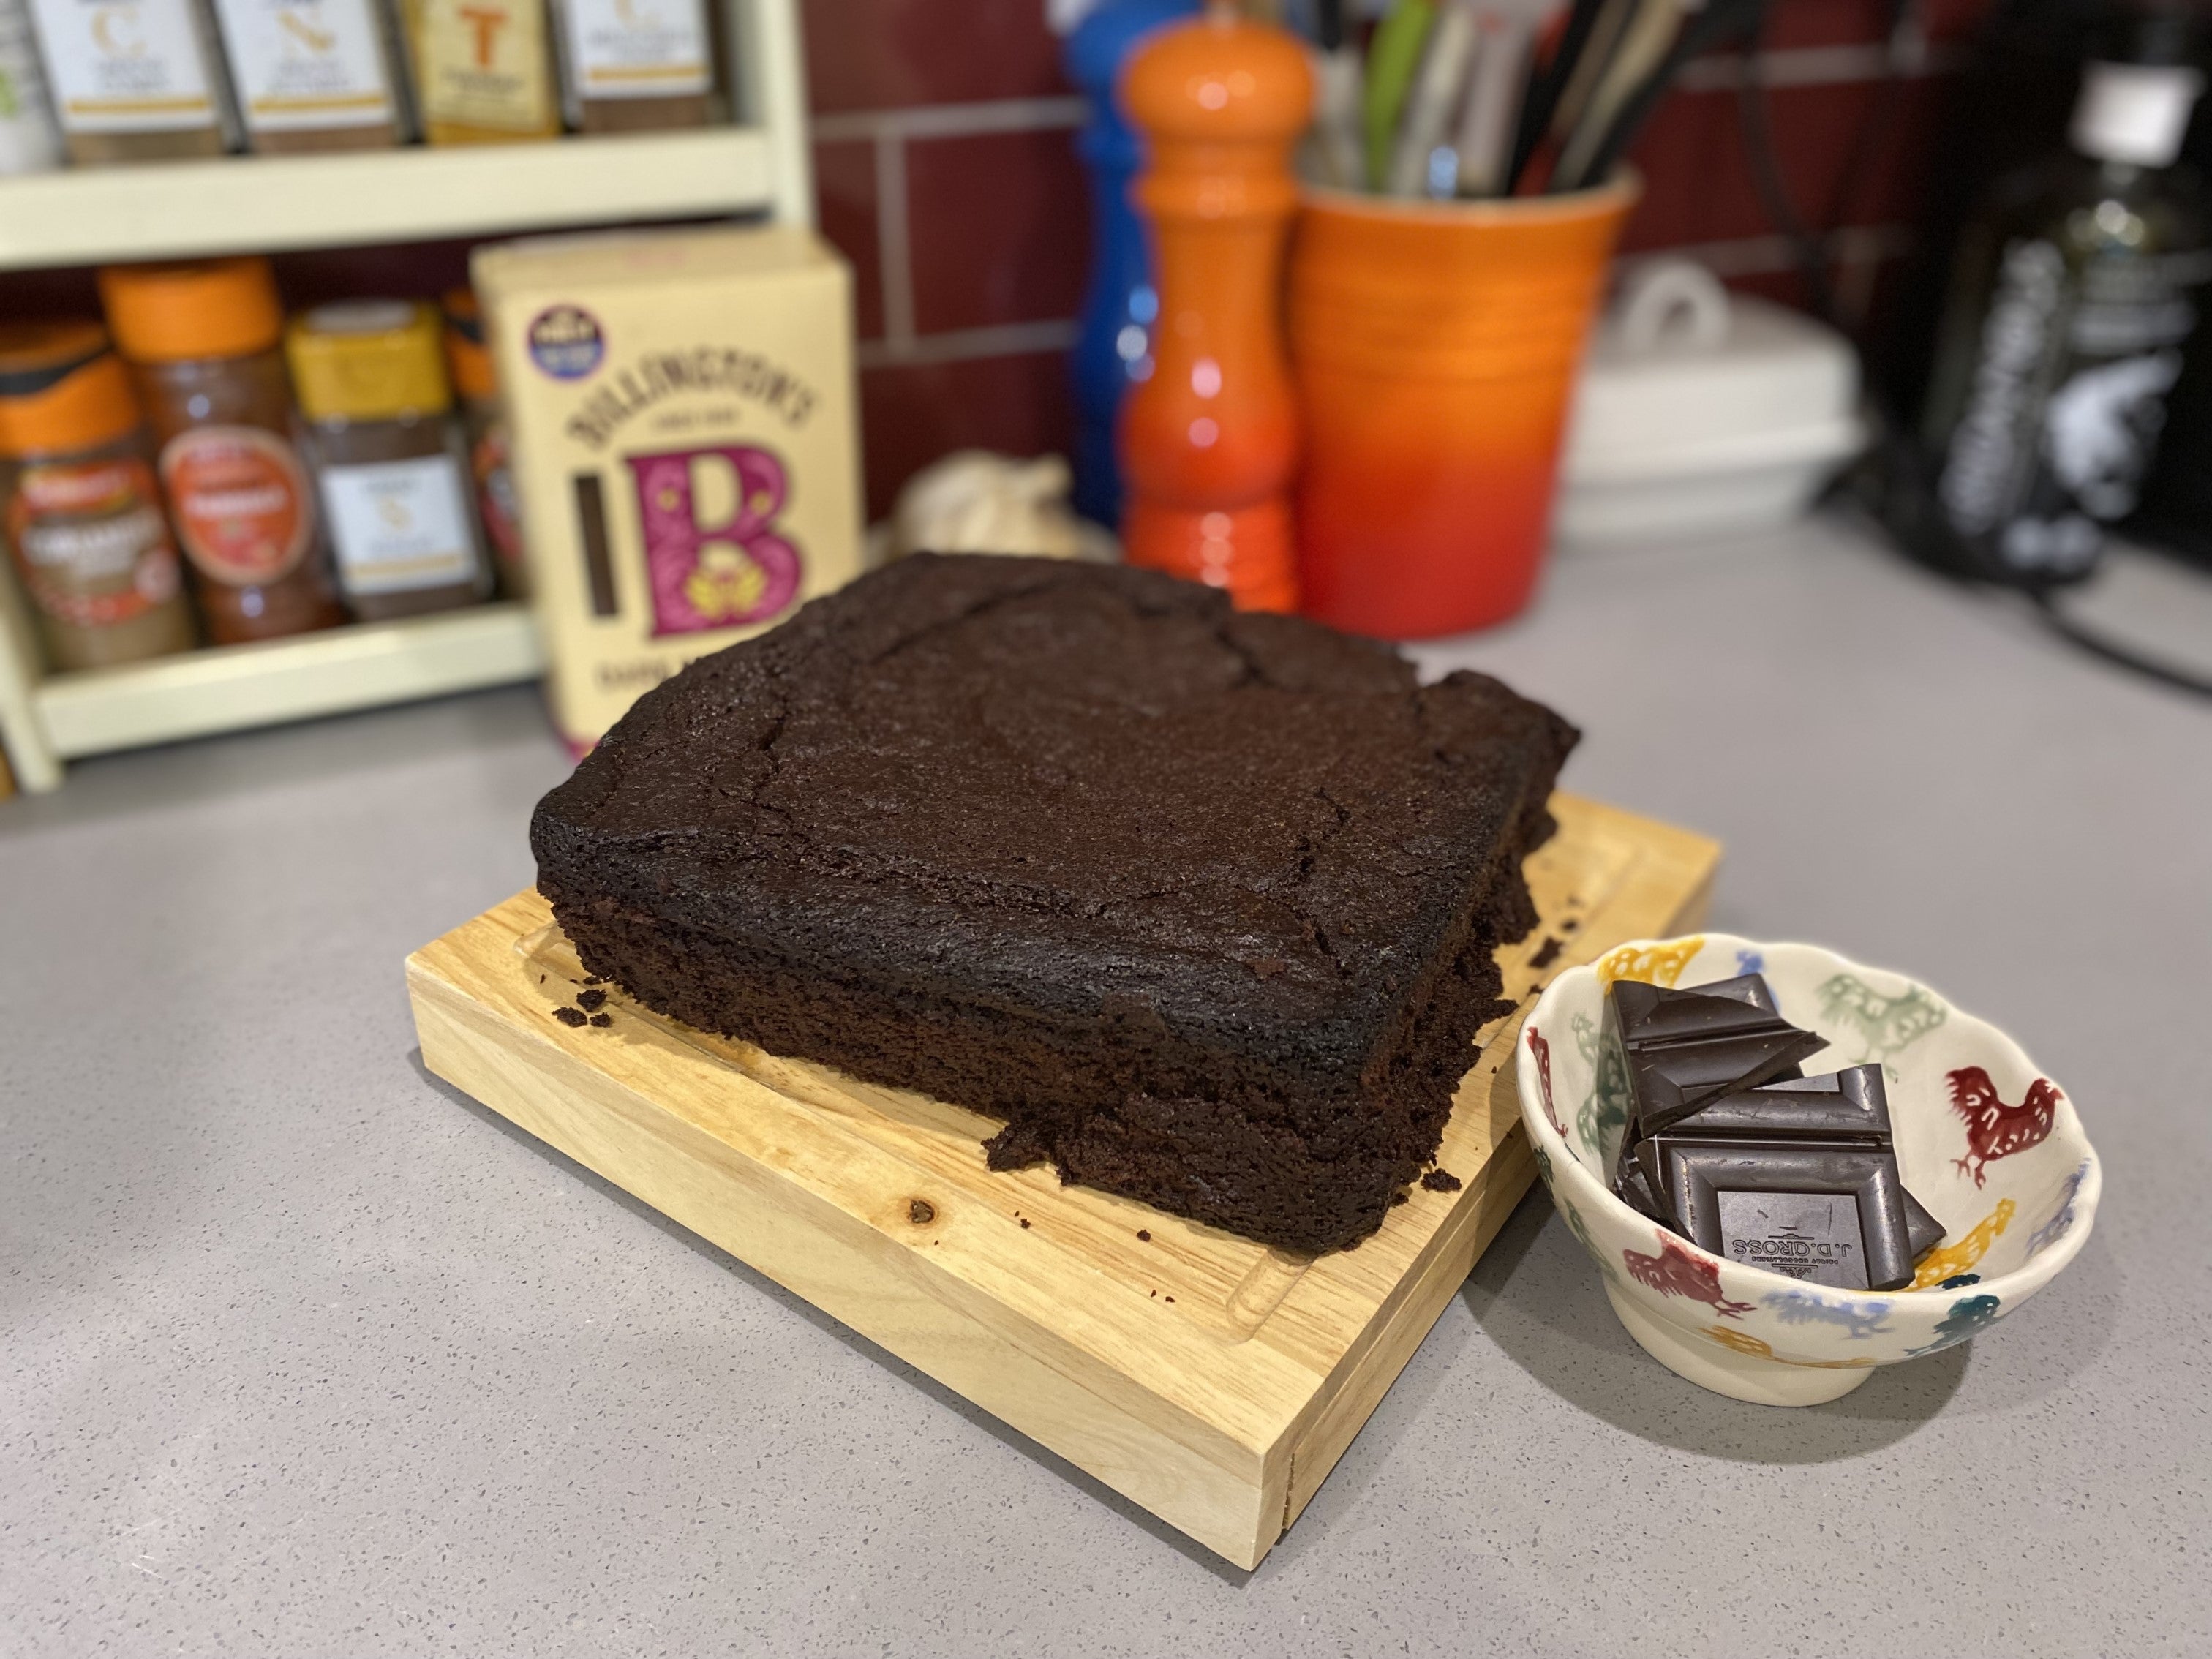 A freshly-baked Jamie Oliver brownie on a wooden chopping board